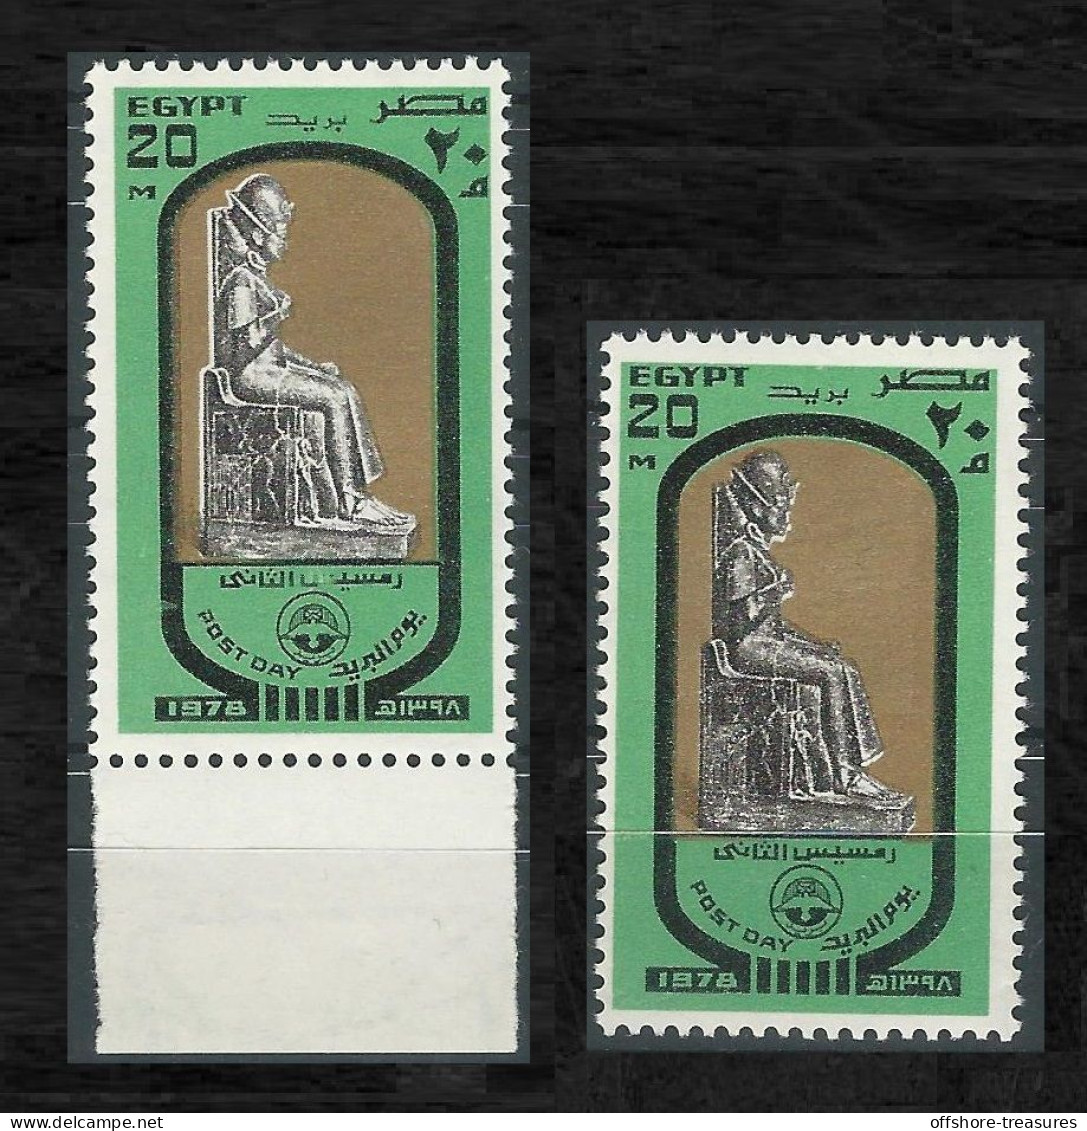 Egypt 1987 King Ramses Post Day 2 STAMP PRINT VARIETY / ERROR MNH STAMPS / SEE SCANS - Storia Postale